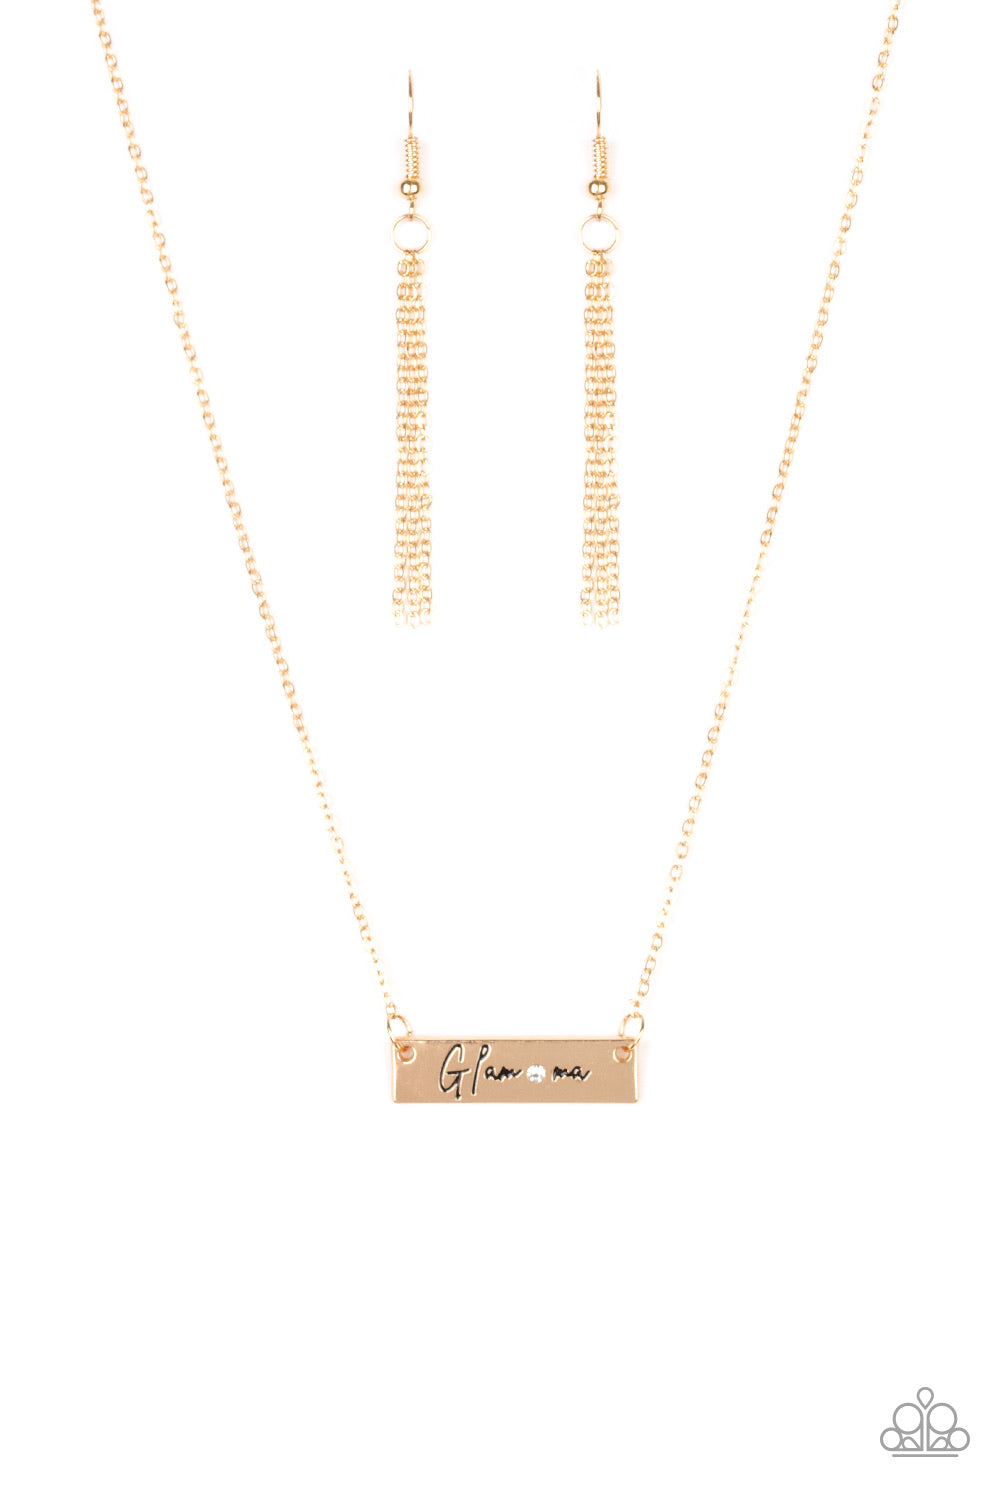 The GLAM-Ma Gold-Necklace